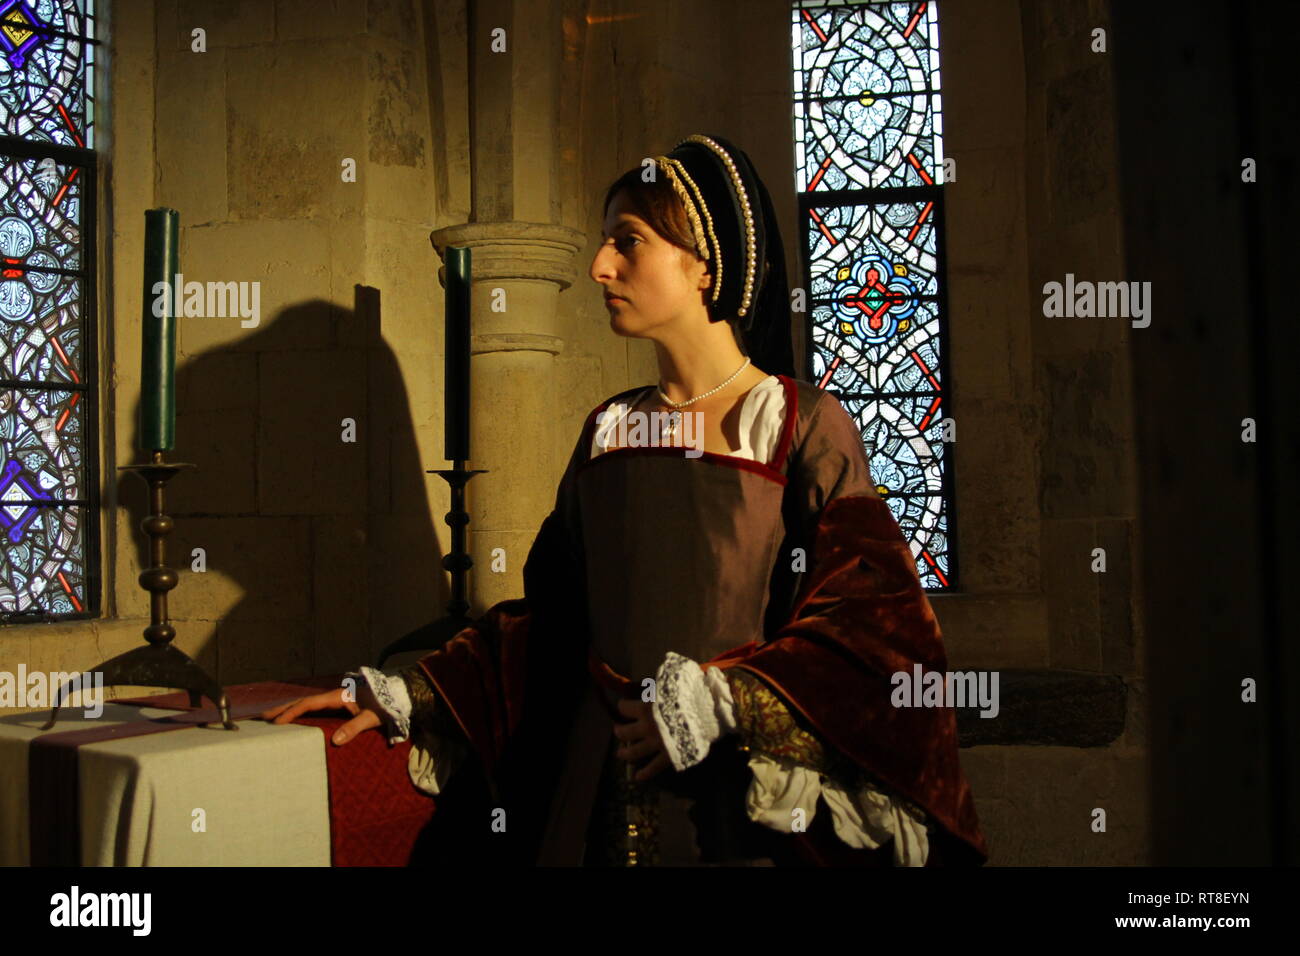 A beautiful young Woman dressed as Anne Boleyn sits by a window at the Tower of London and looks thoughtful. Stock Photo